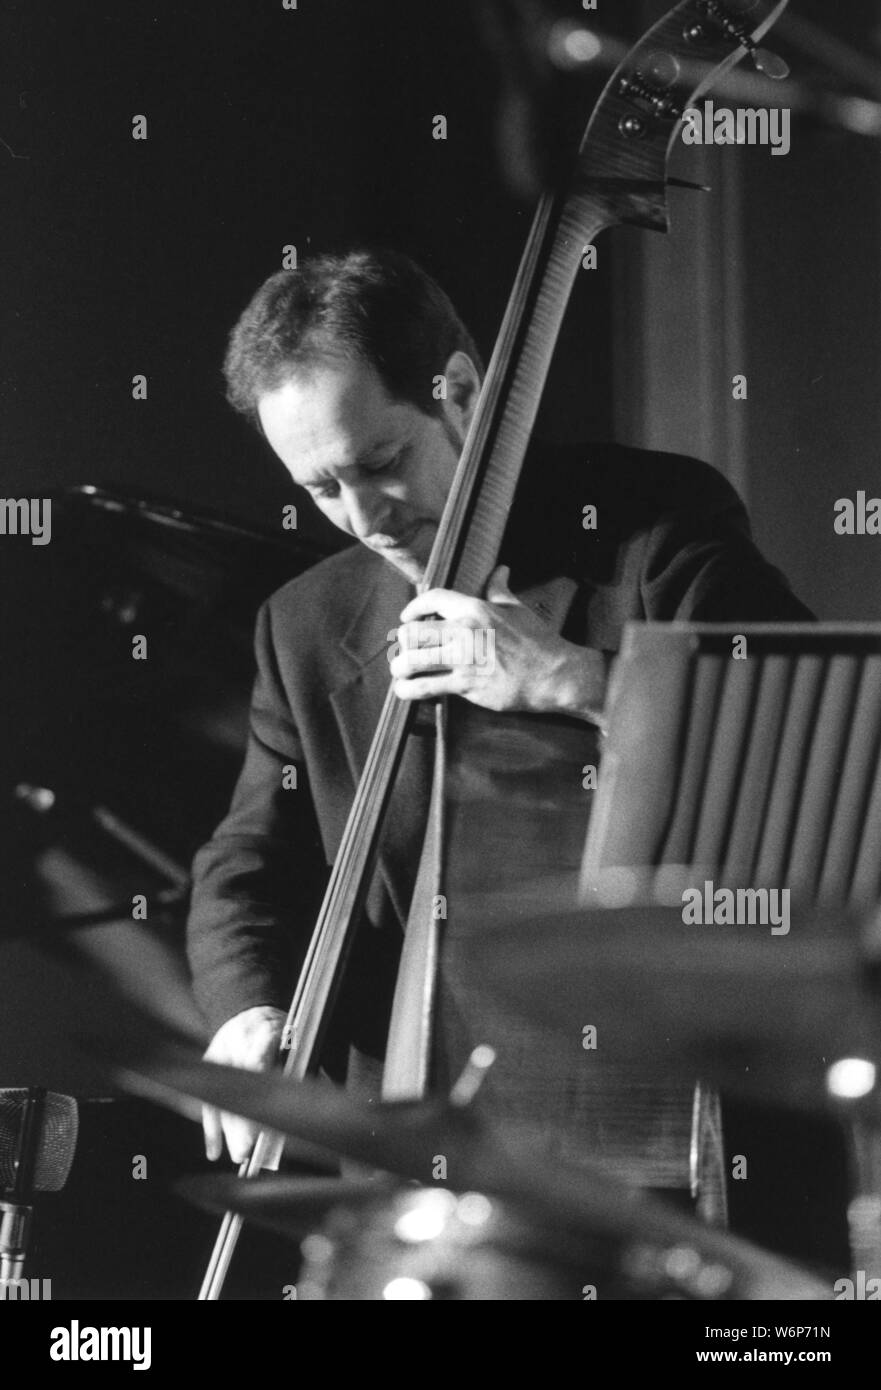 Phil Flanigan, playing double bass, c2008. Stock Photo